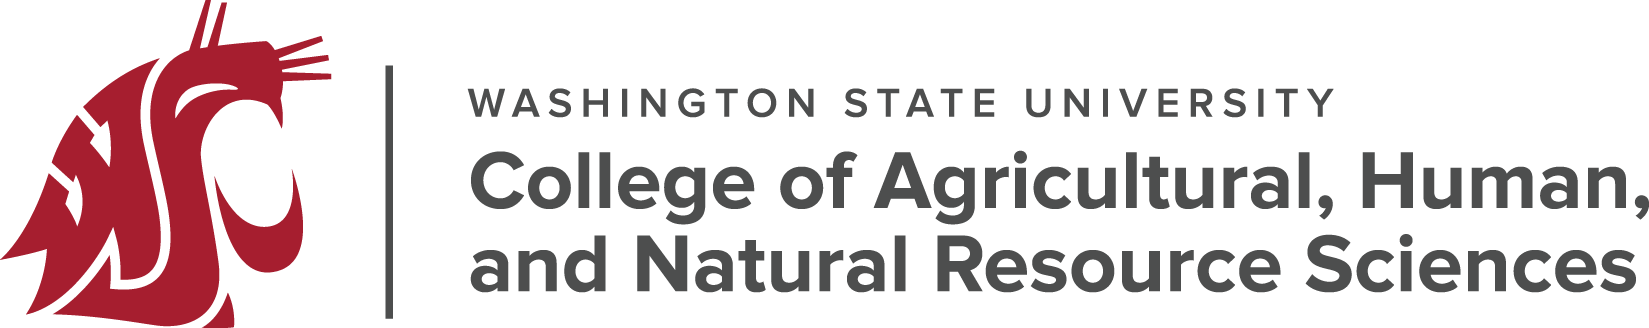 Washington State University, College of Agricultural, Human and Natural Resource Sciences